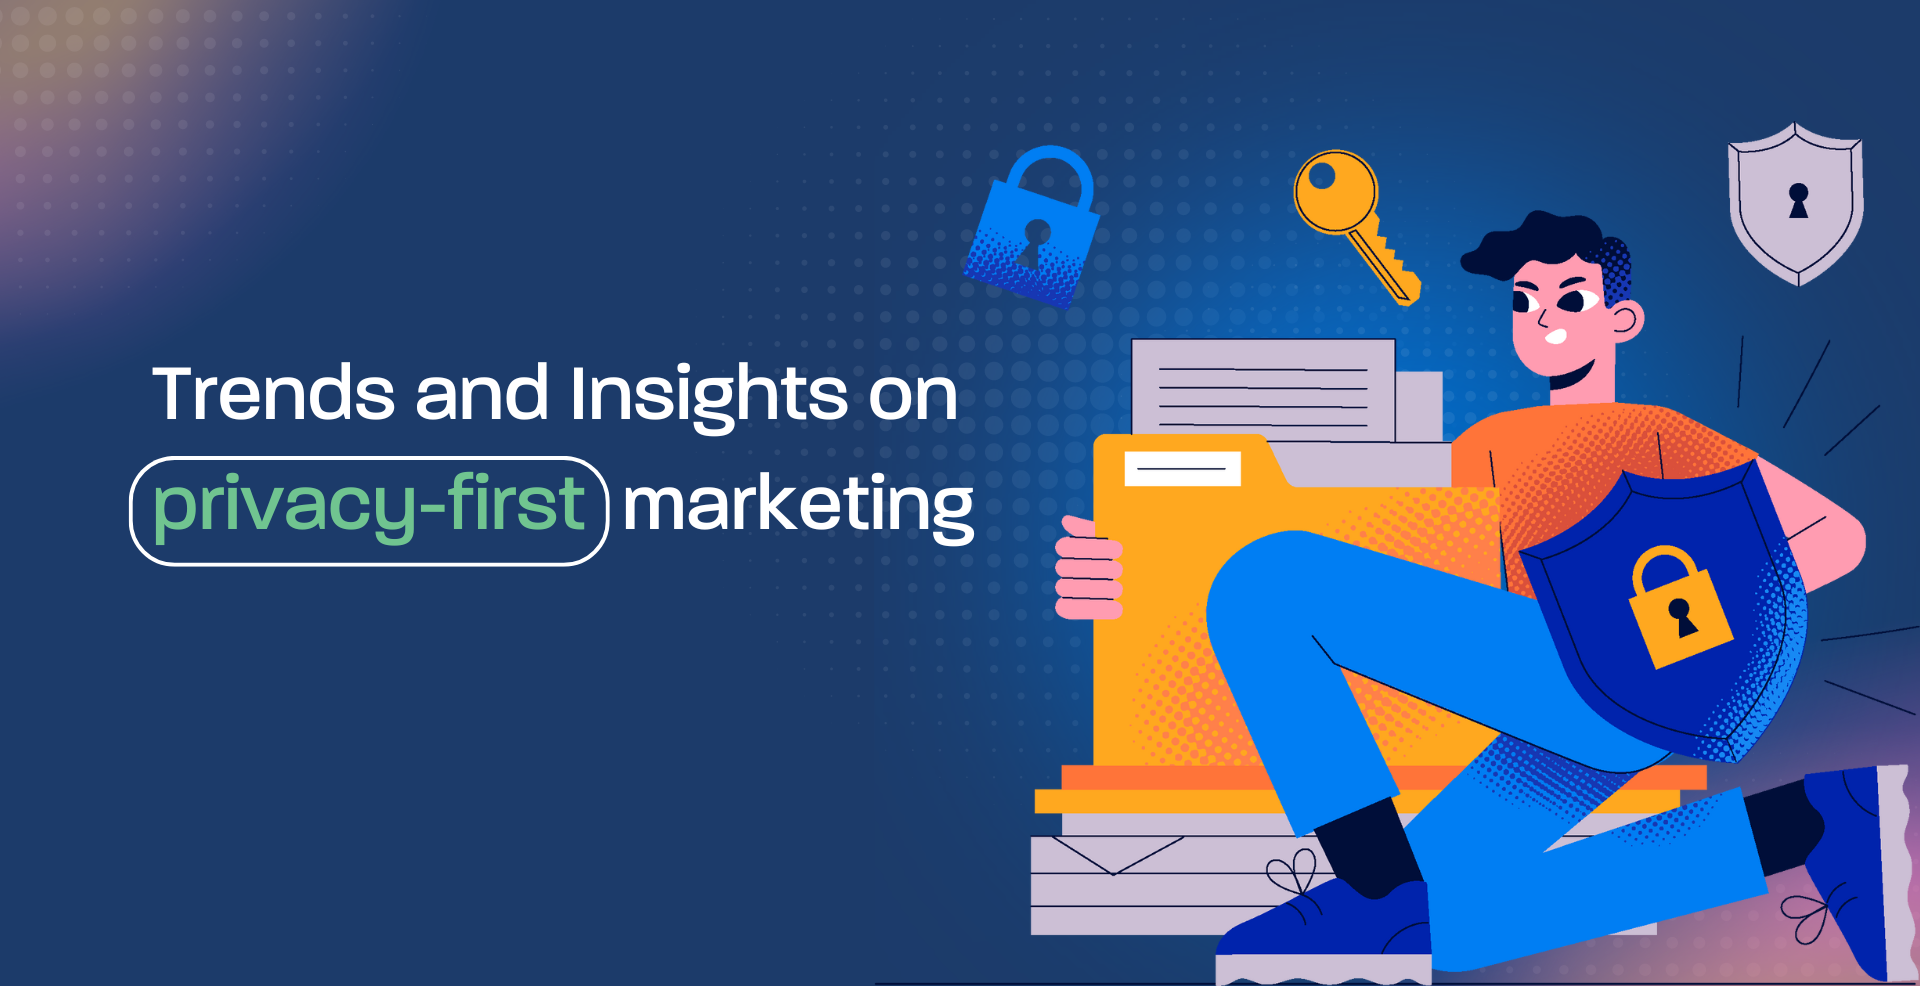 Trends and Insights on privacy-first marketing